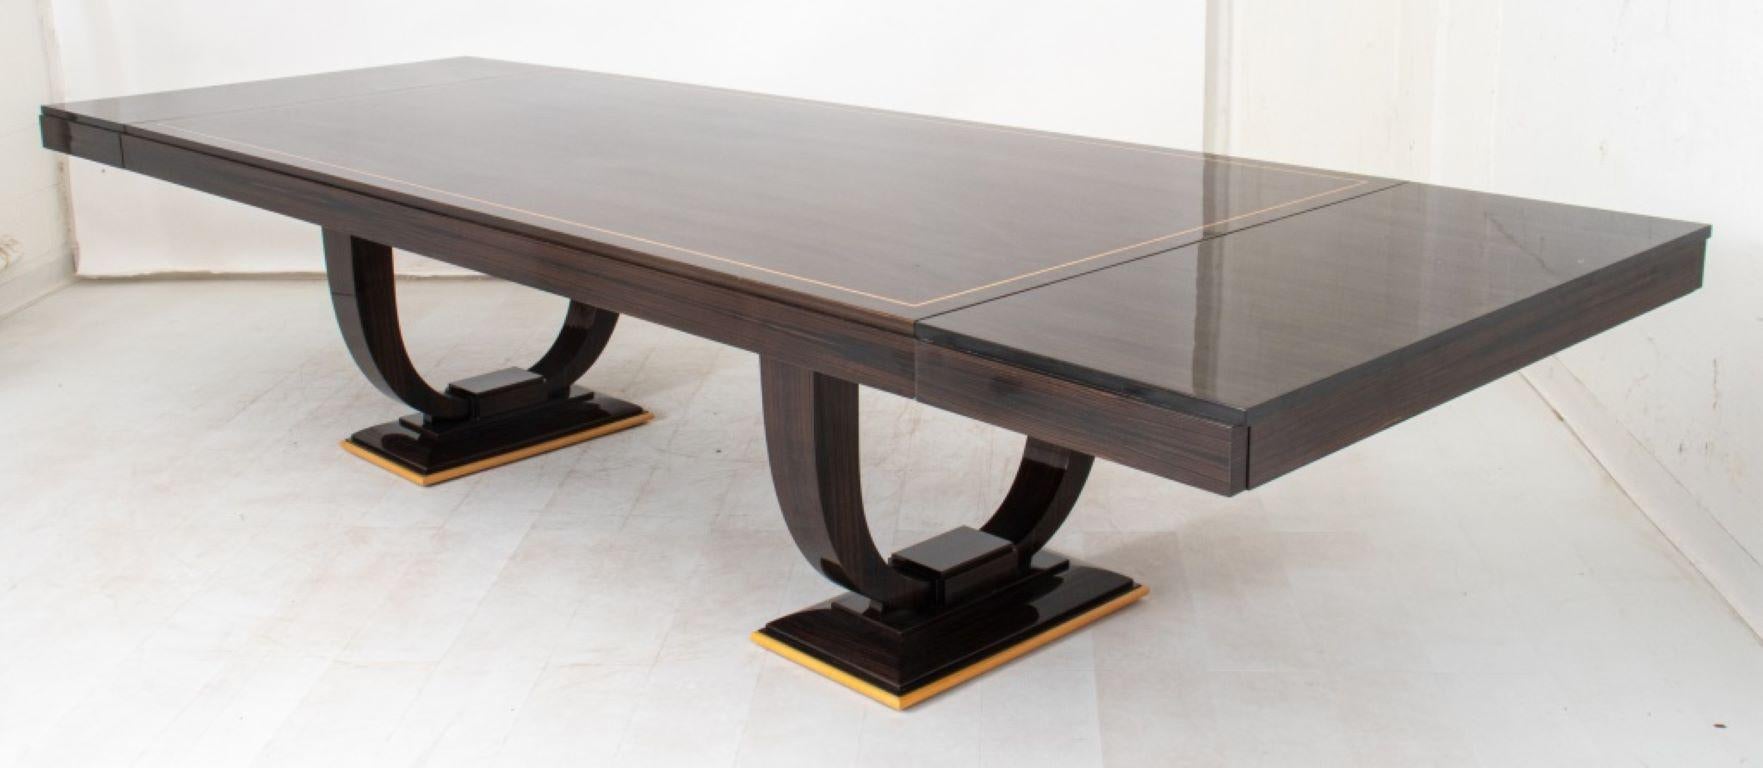 Art Deco Revival Macassar Extendable Dining Table For Sale 2